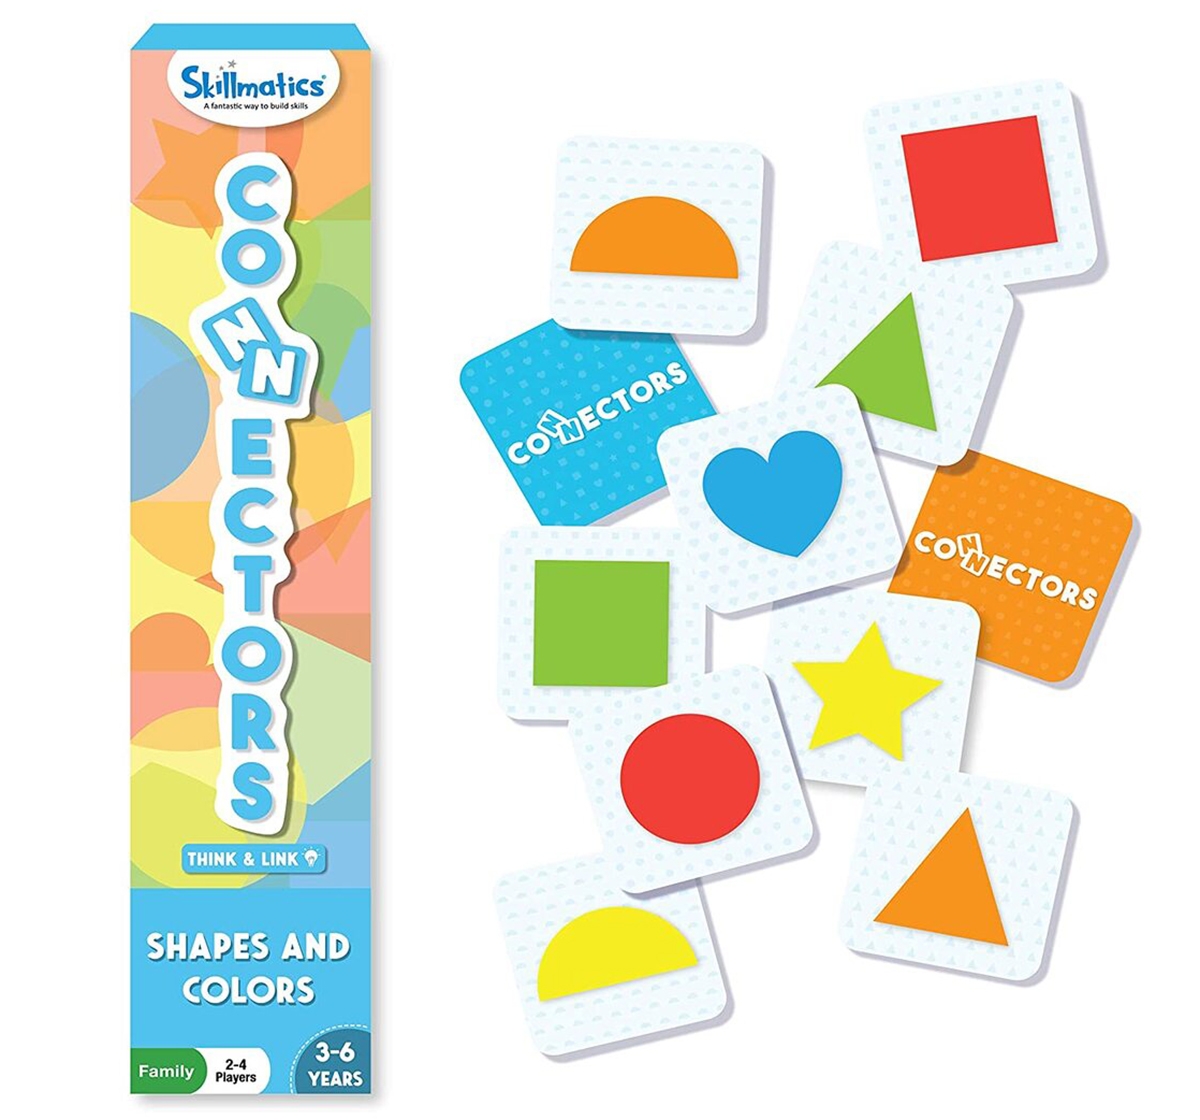 Skillmatics Connectors Educational Game: Shape and Color